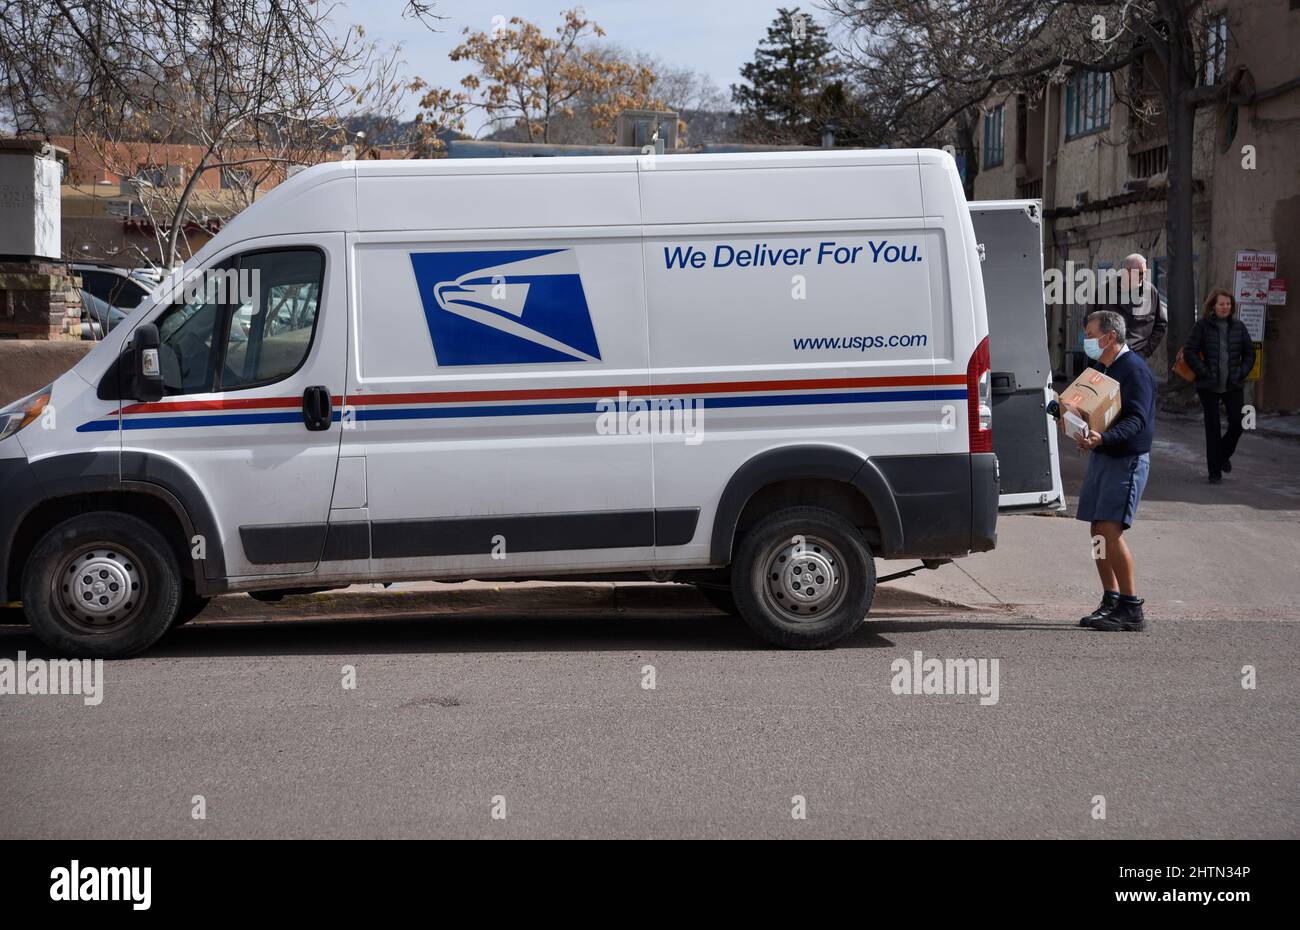 A US postman or mailman delivers a package to a business in Santa Fe, New Mexico. Stock Photo